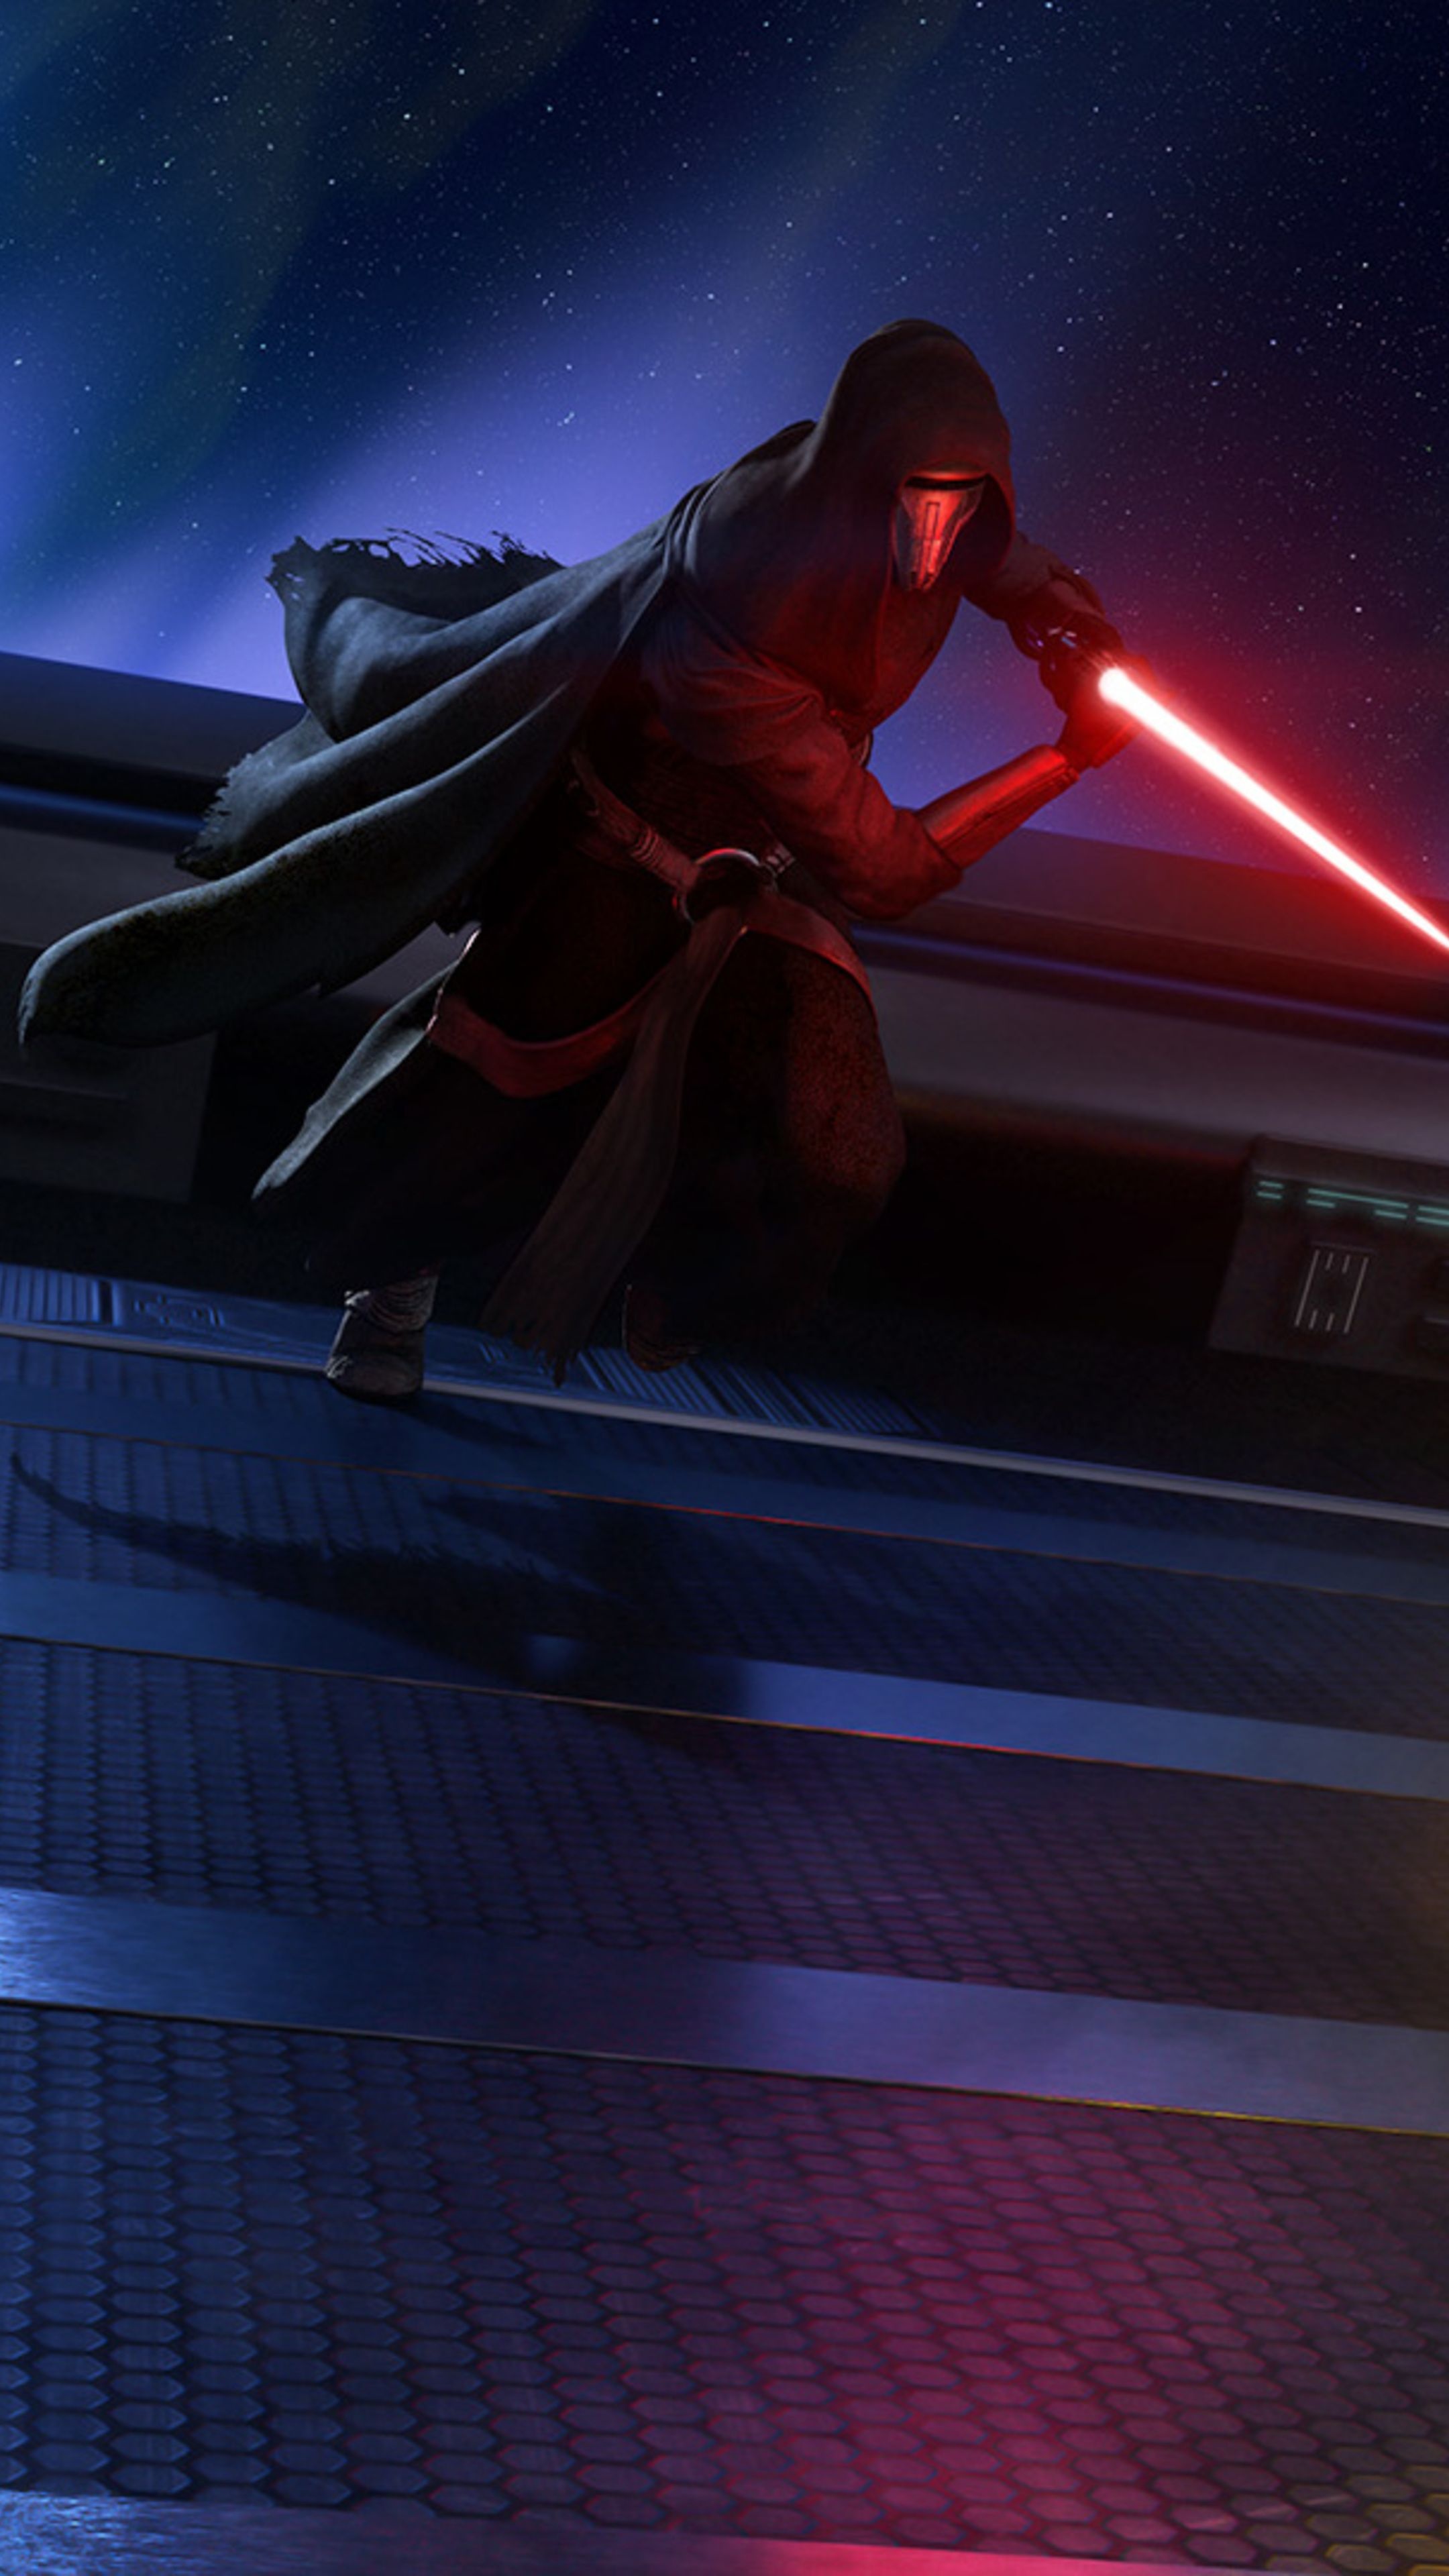 Darth Revan: The character won the 2015 Black Series Fan Choice Poll at San Diego Comic-Con. 2160x3840 4K Background.